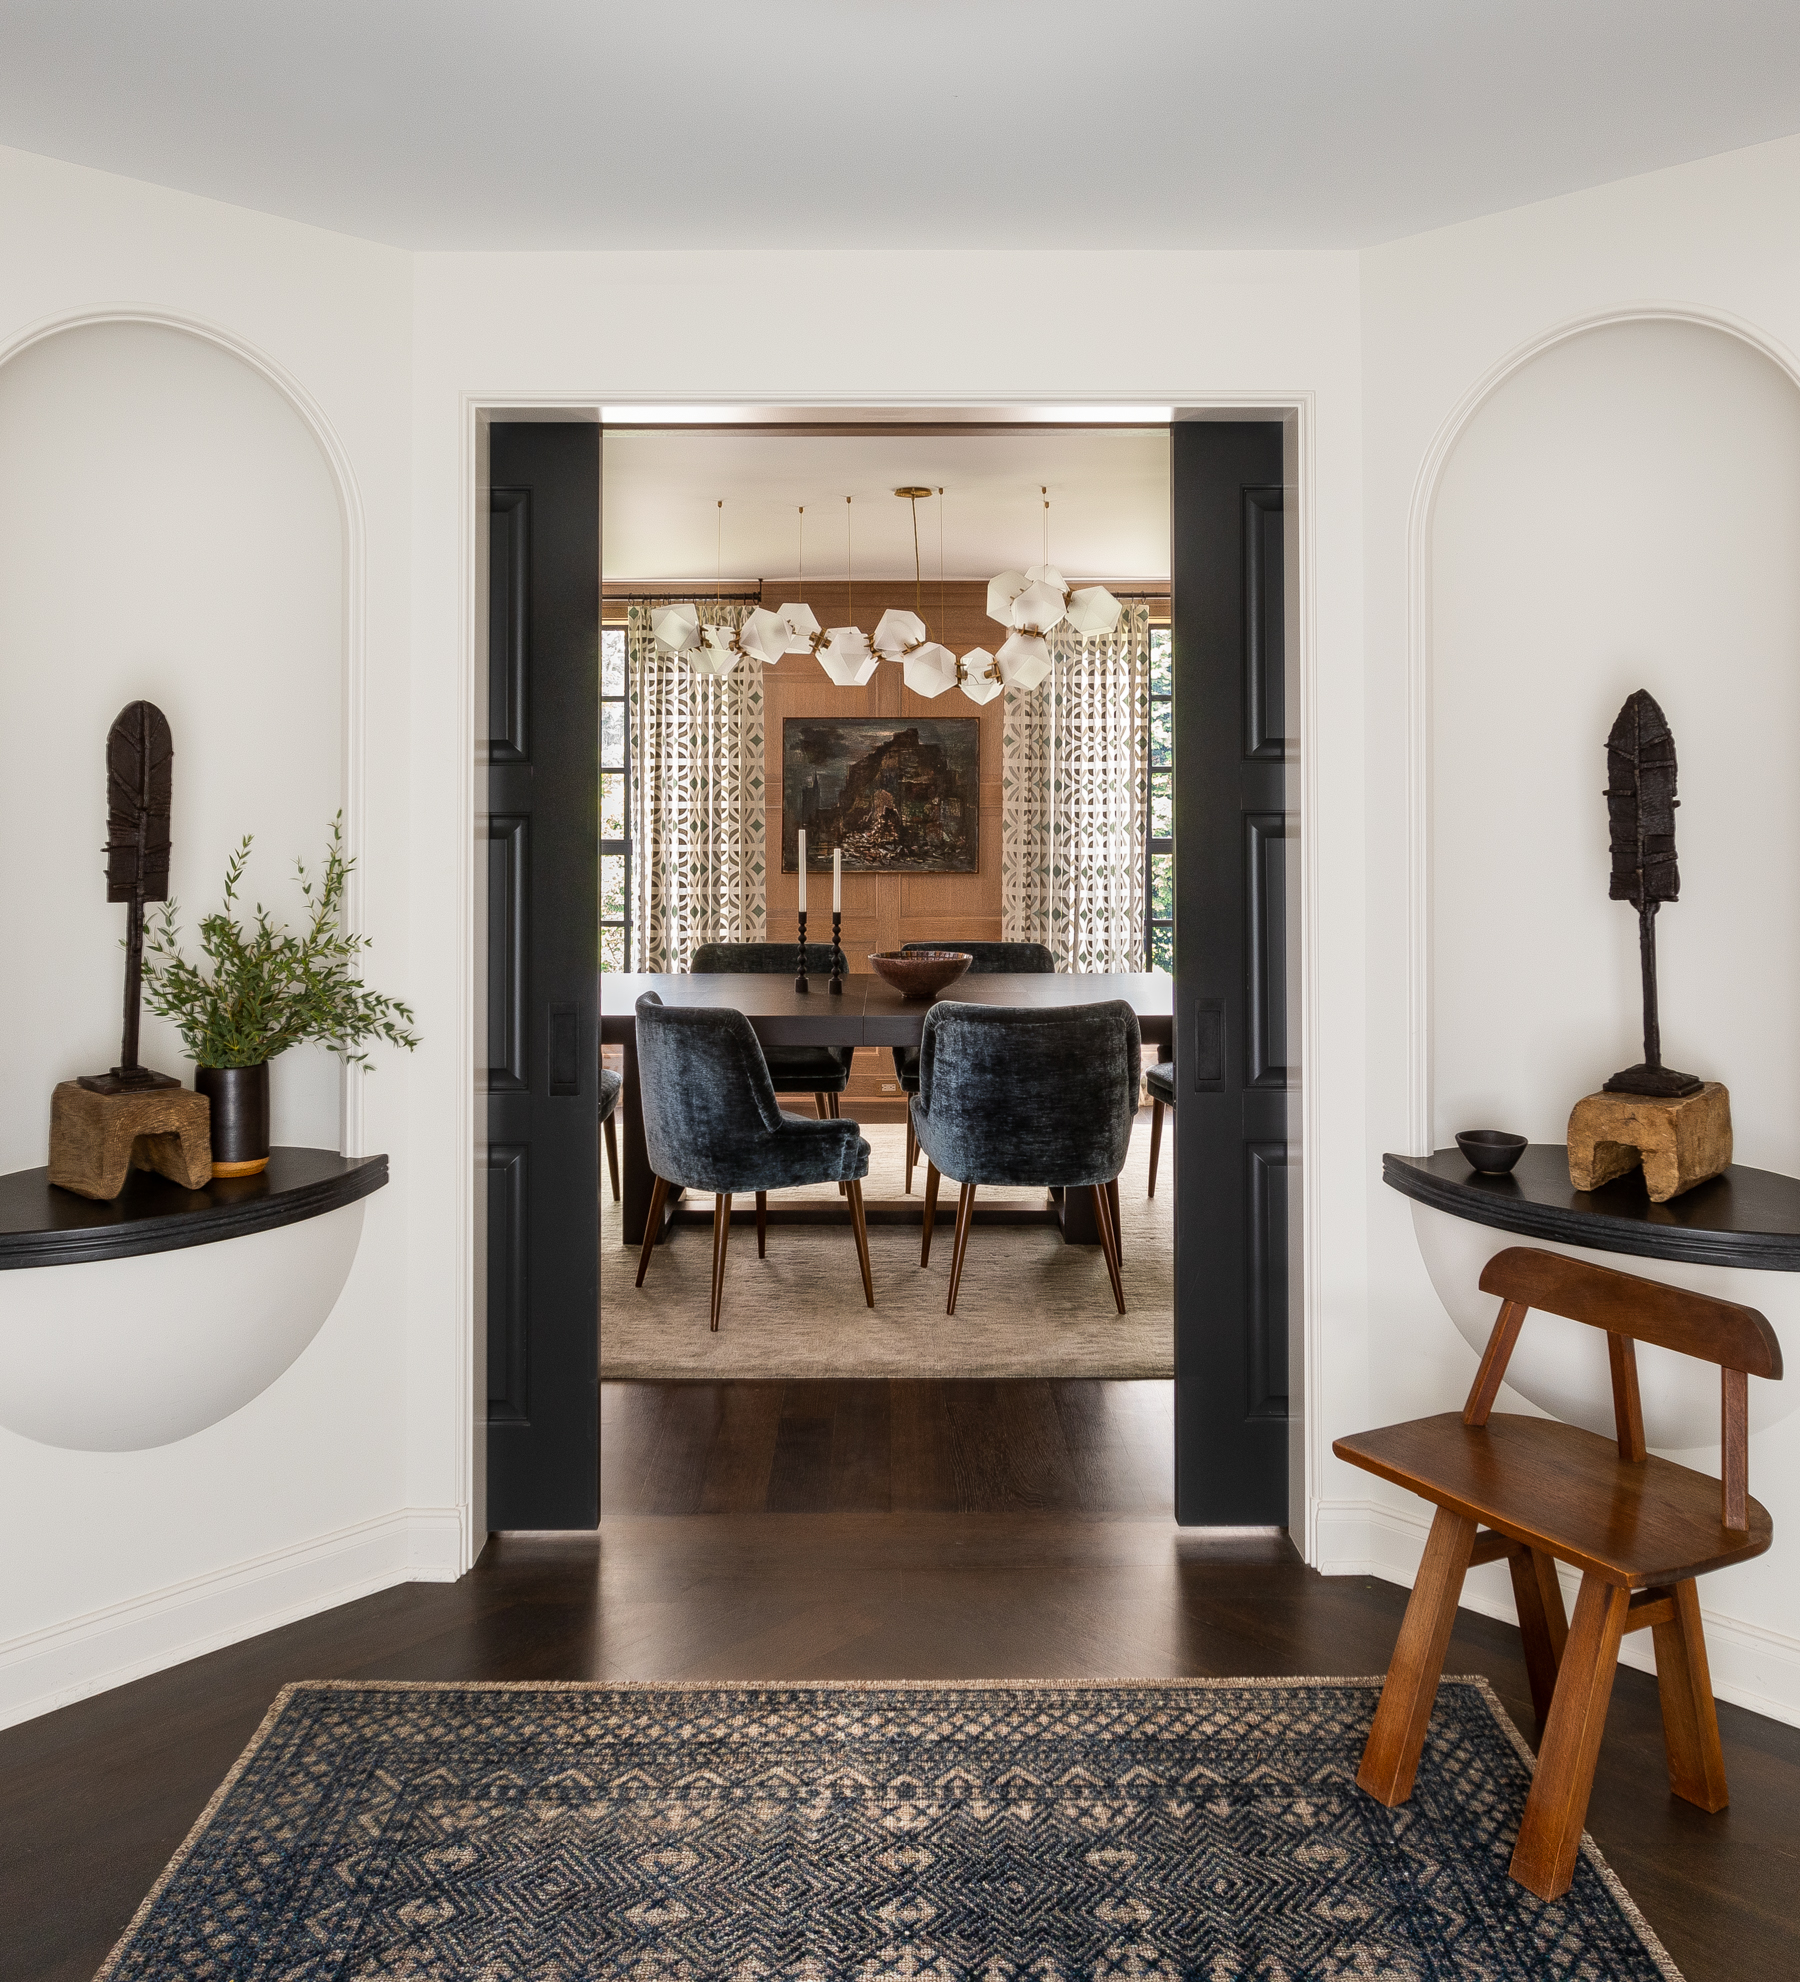 Entry looking into the dining room, showcasing niche wall cutouts with sculptures and a vintage wood chair.